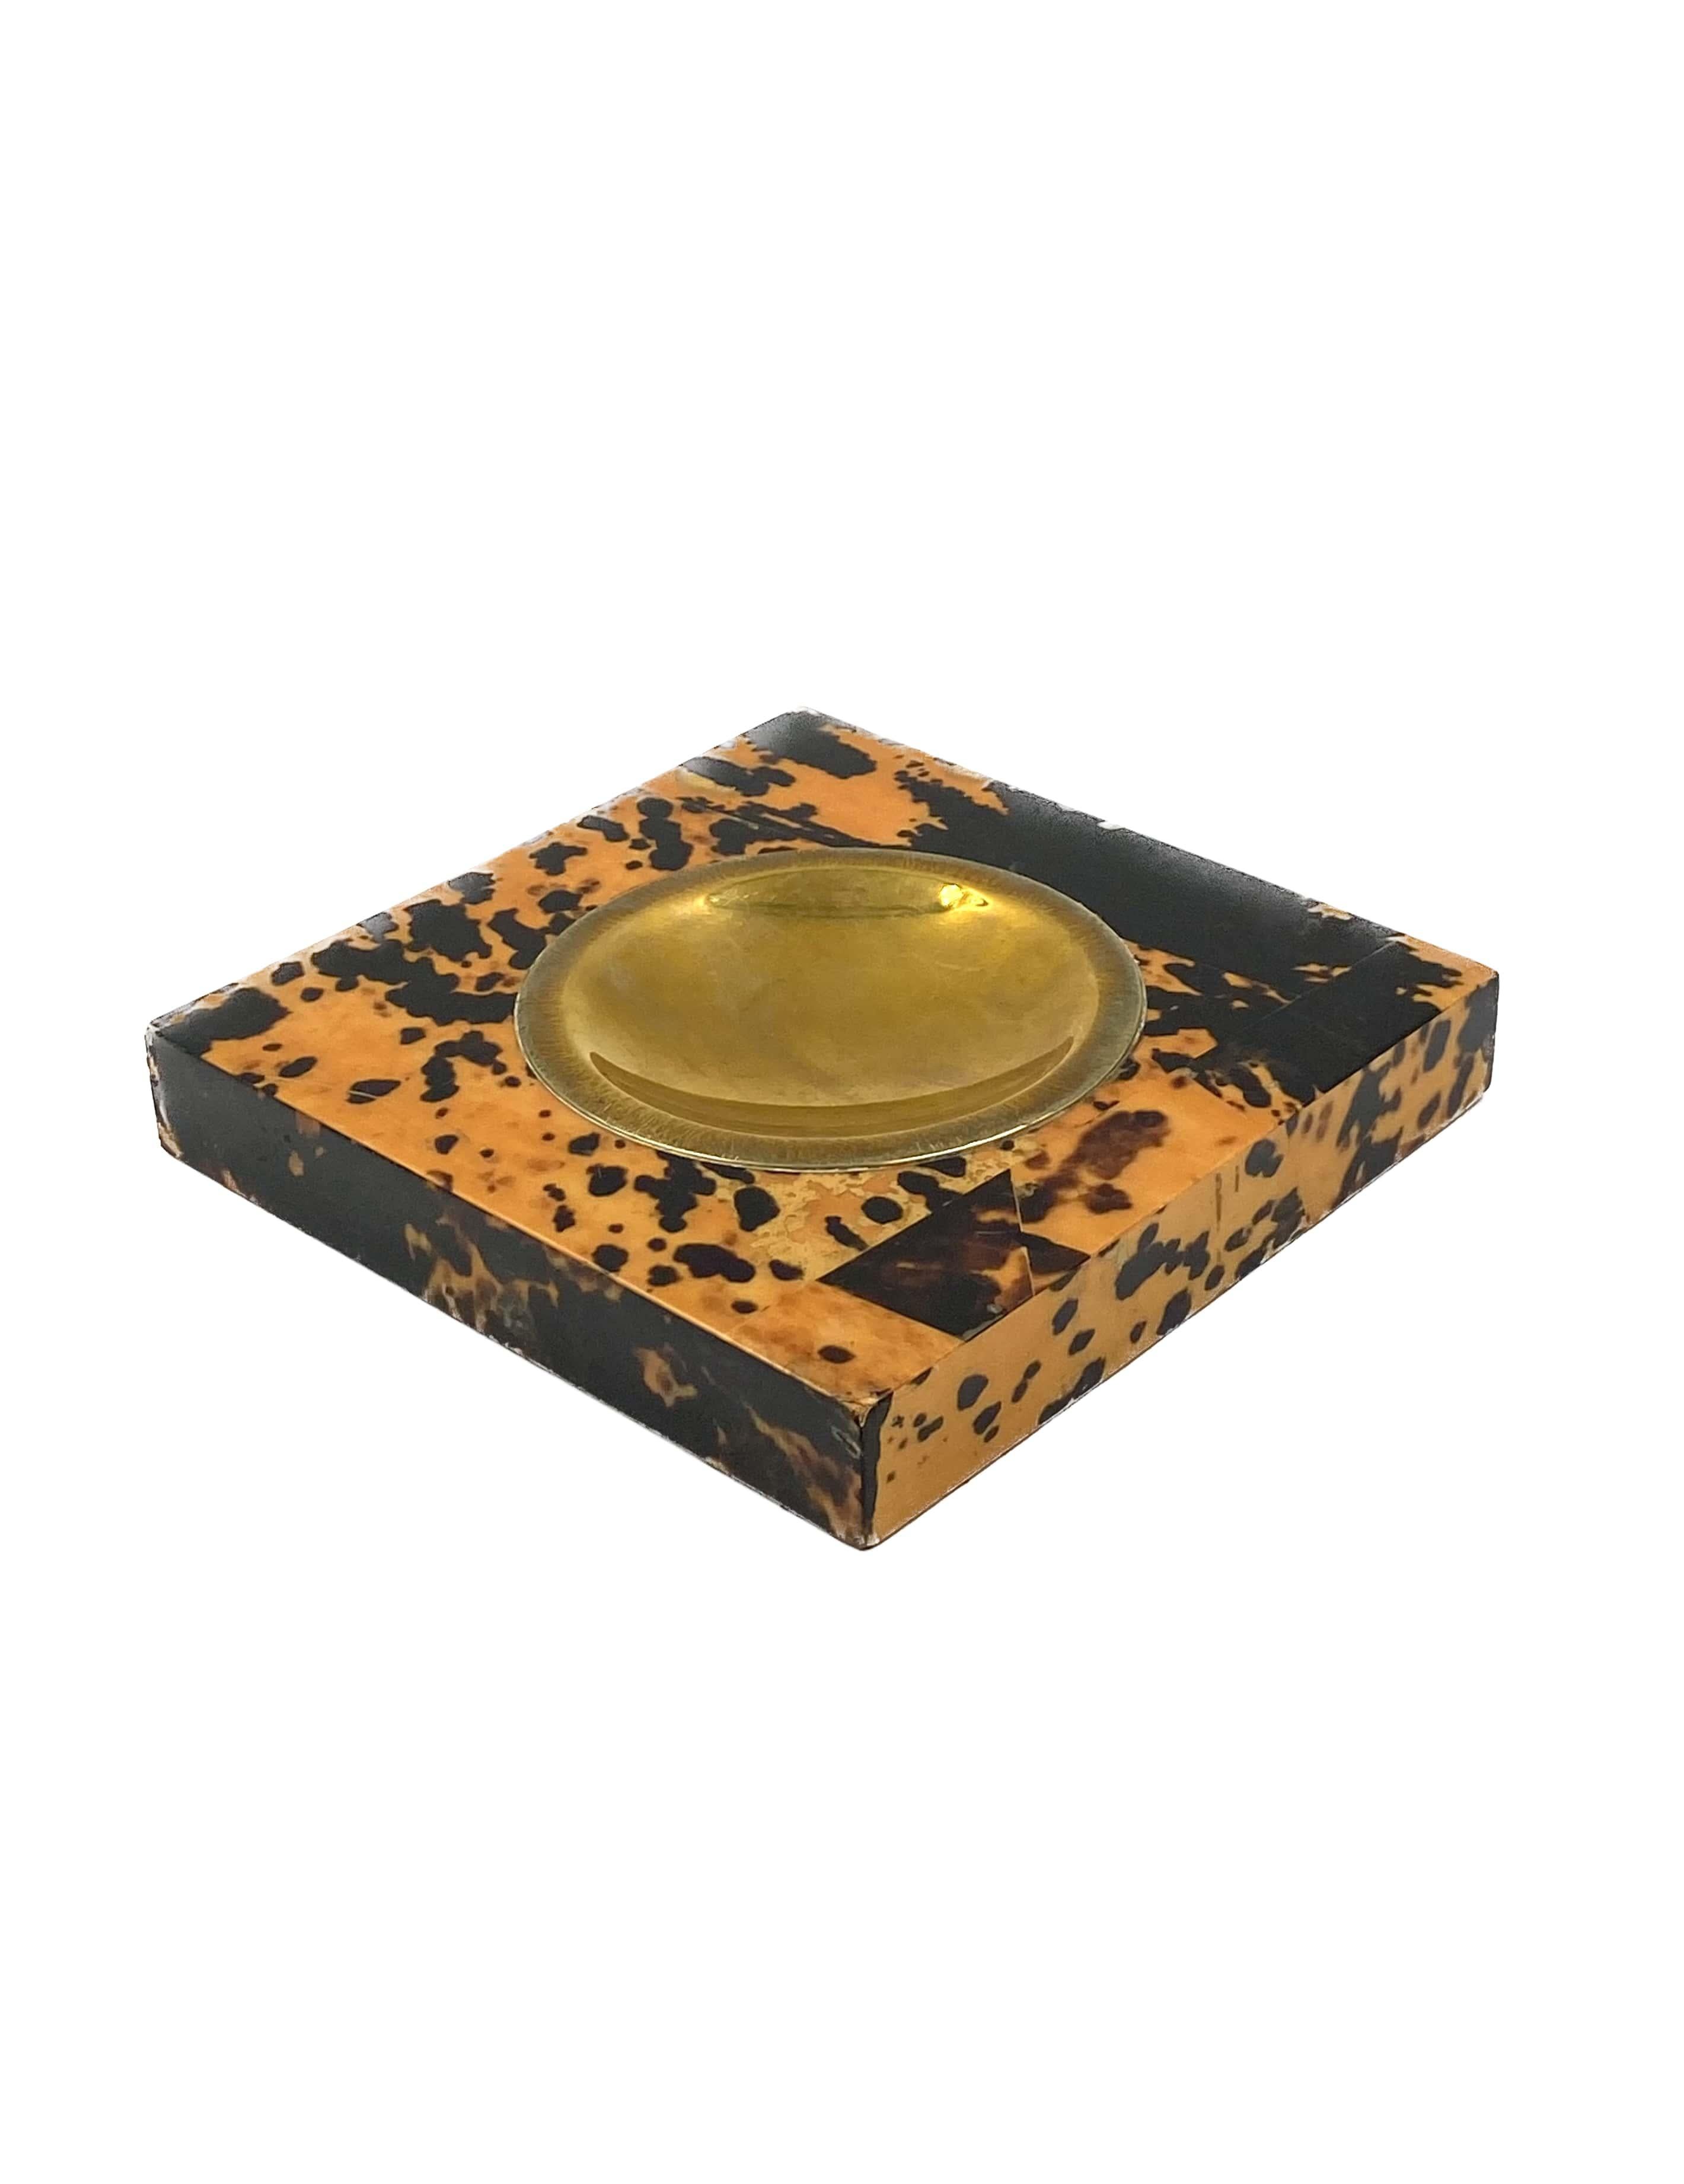 Smoking Set, brass and wood tray, ashtray, lighter and cigars box, Italy 1970 For Sale 6